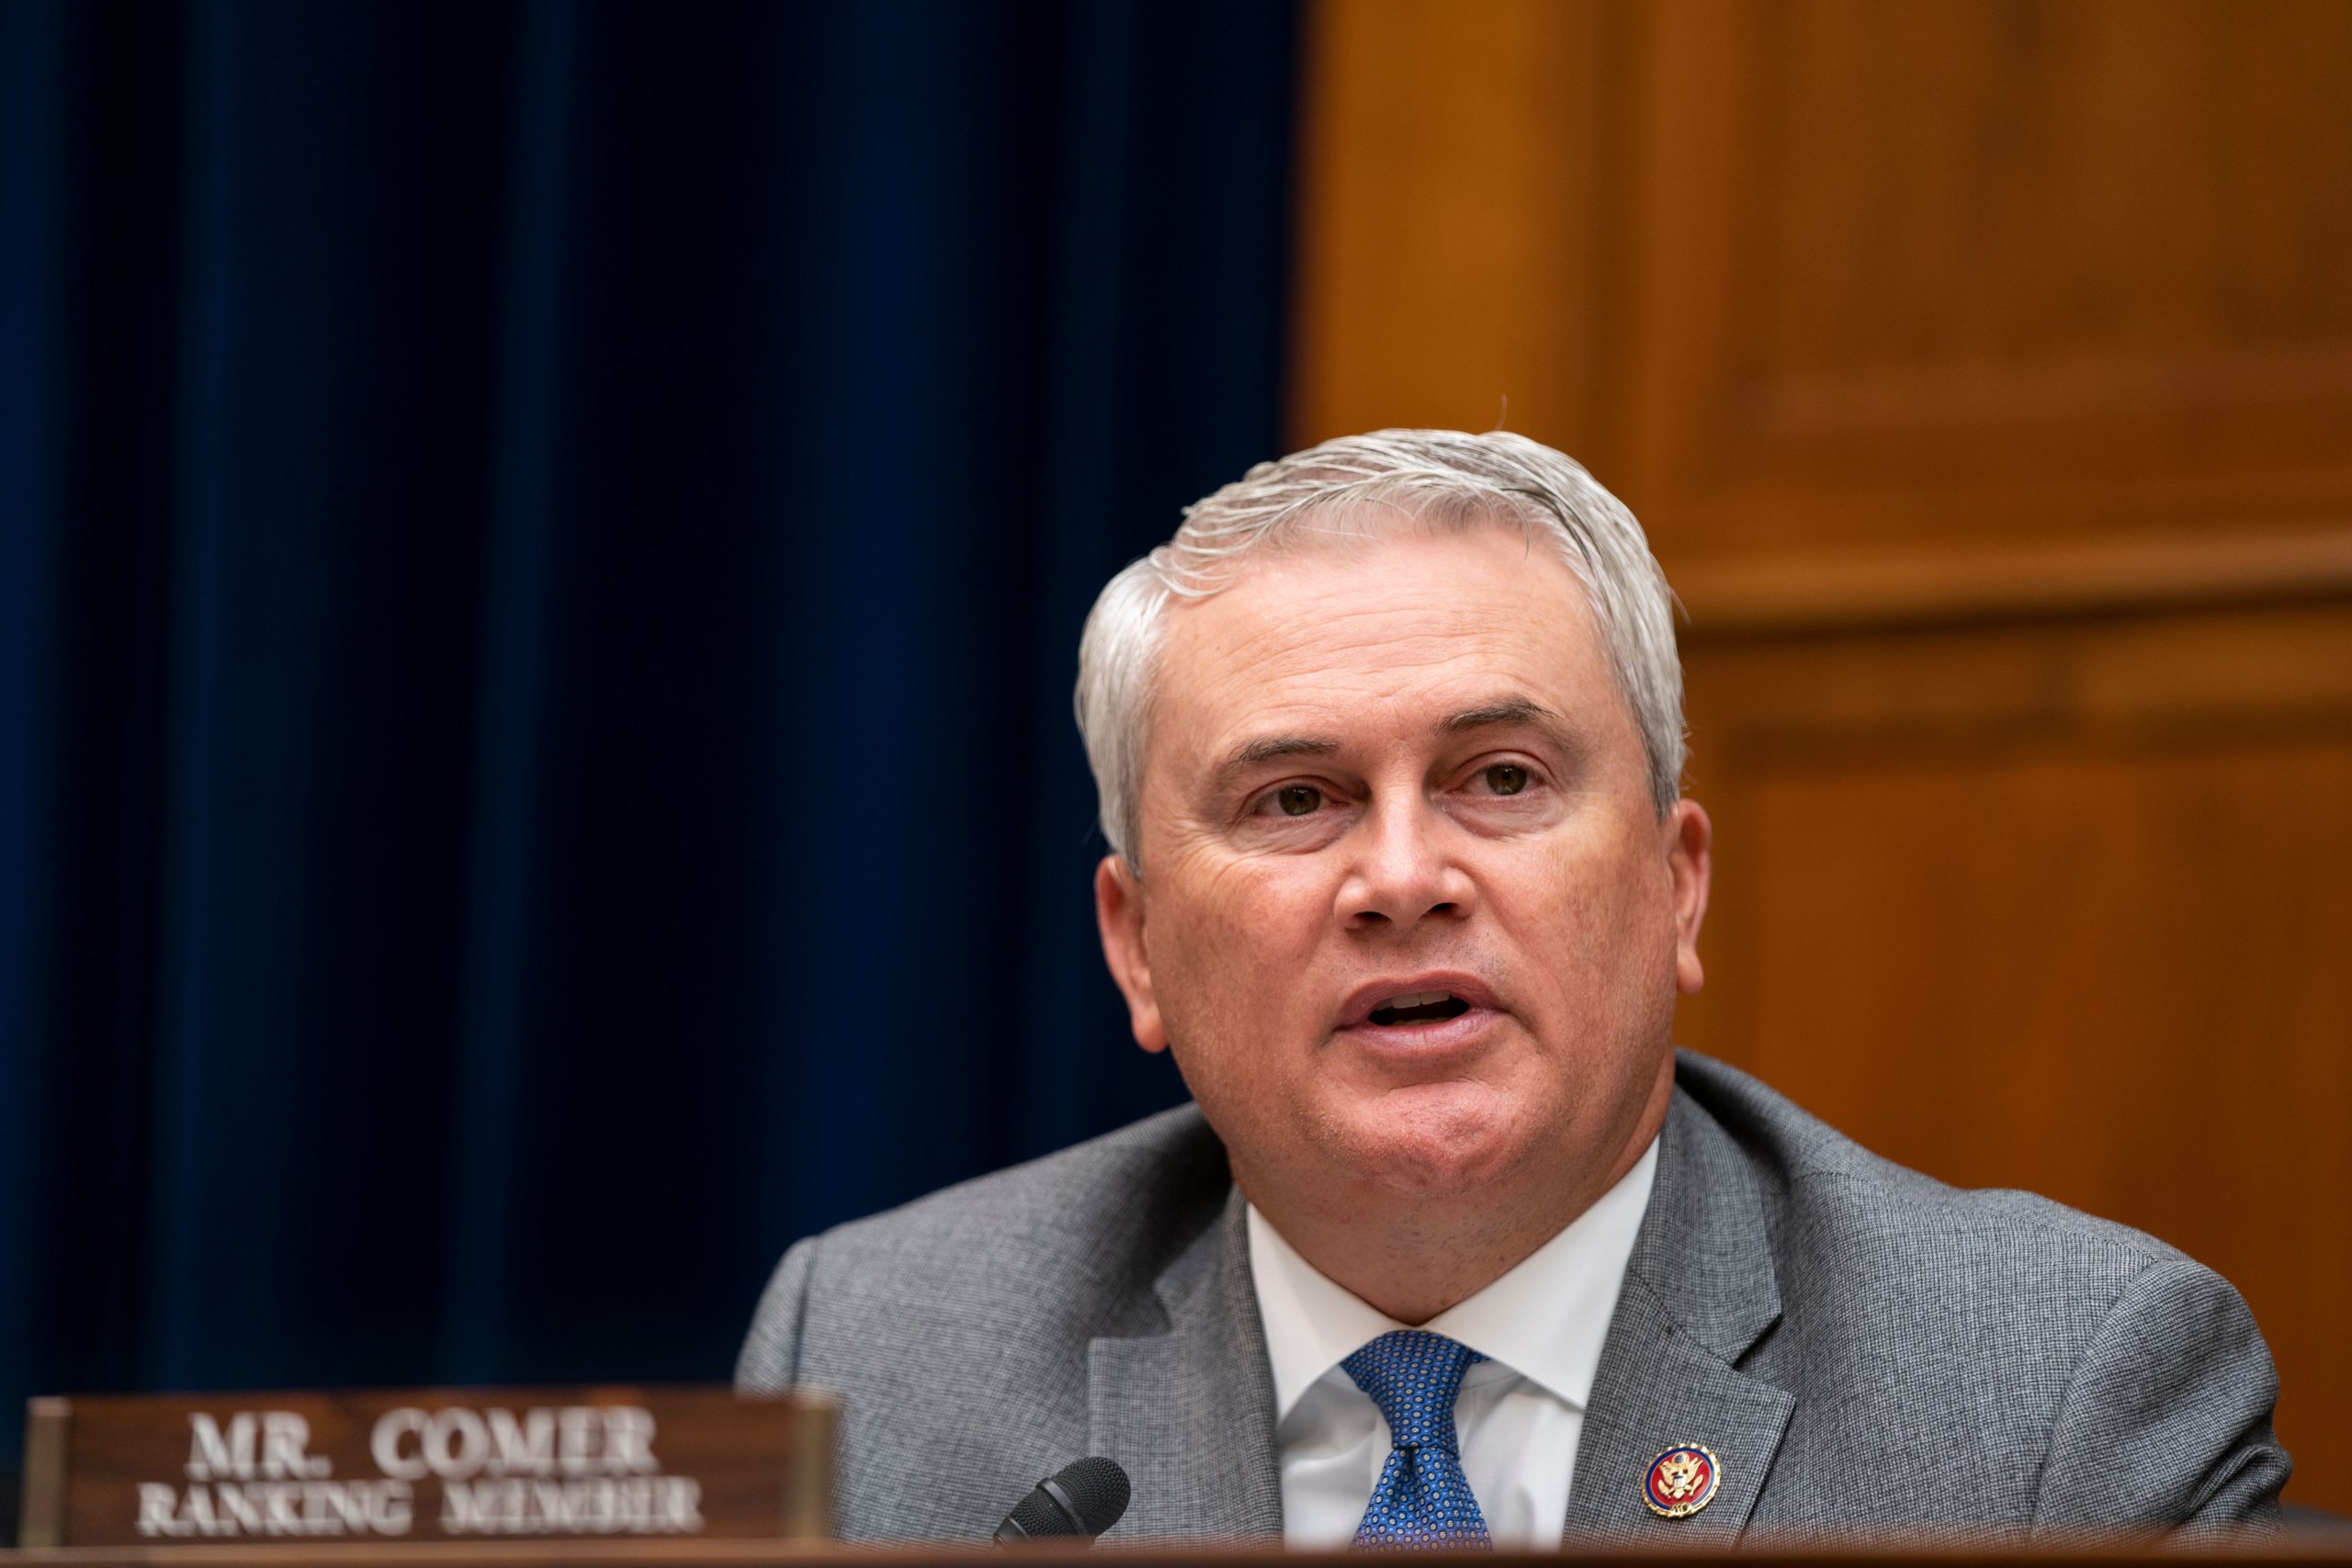 Republican Kentucky Rep. James Comer makes an opening statement during a hearing on Sept. 30, 2020. (Alex Edelman/Pool/AFP via Getty Images)